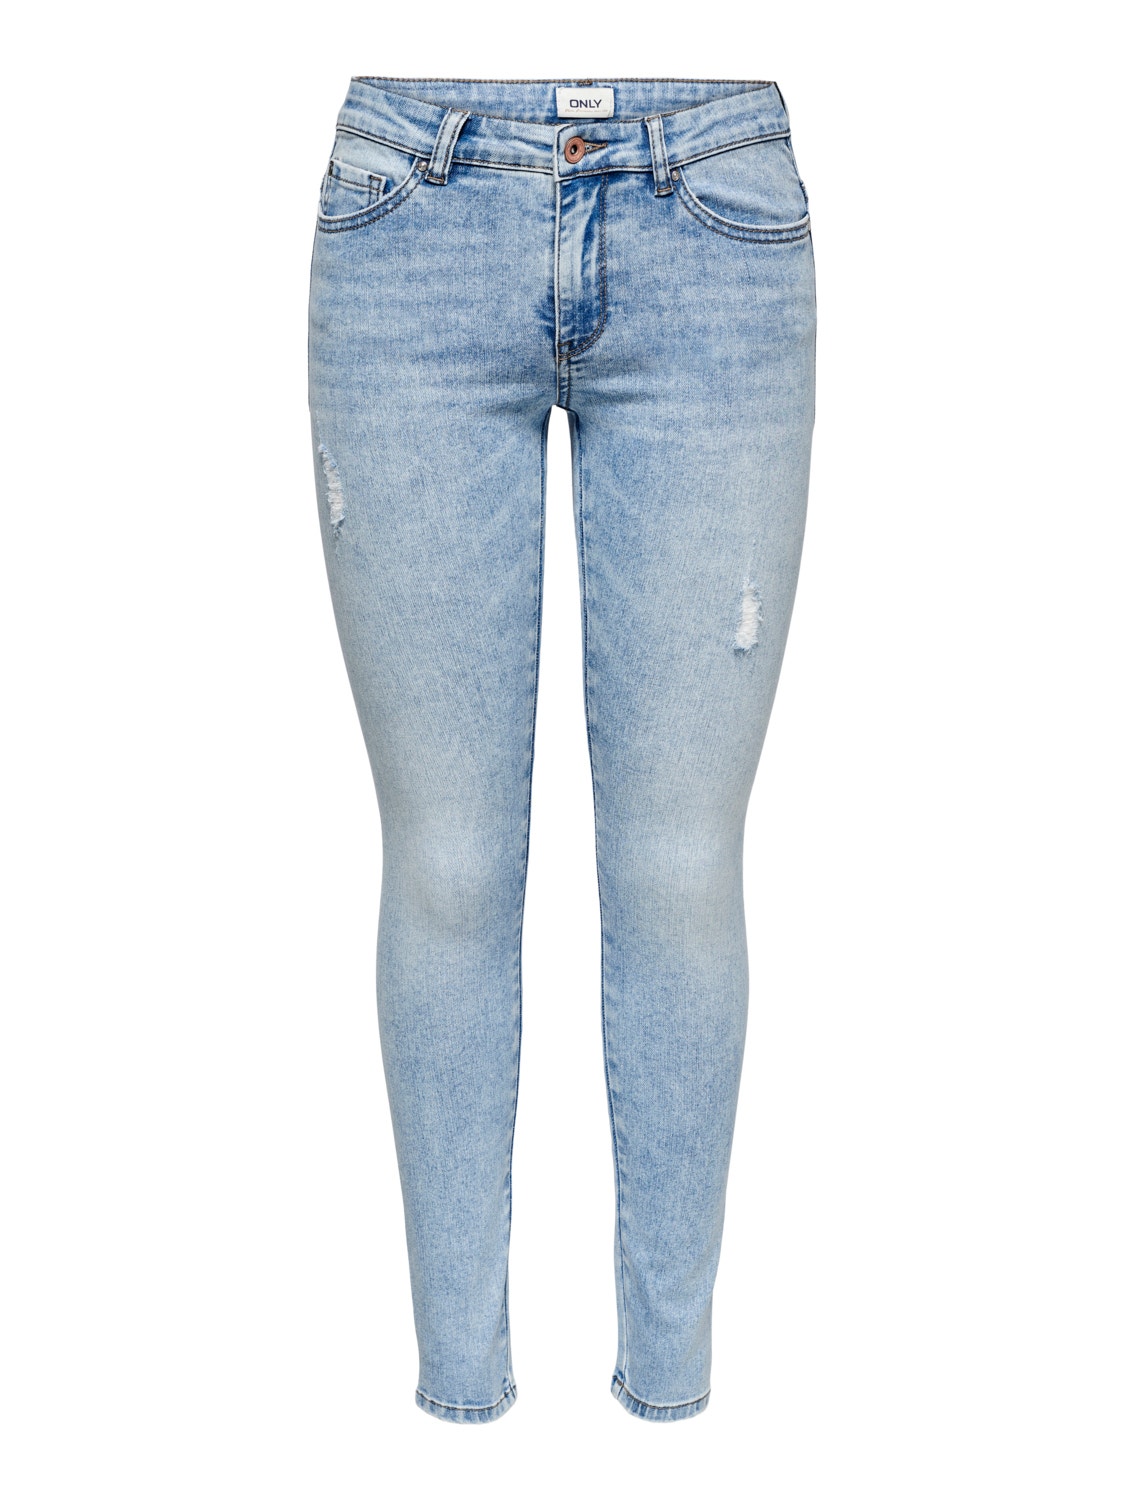 ONLY Jeans Skinny Fit Taille moyenne -Light Blue Denim - 15259191